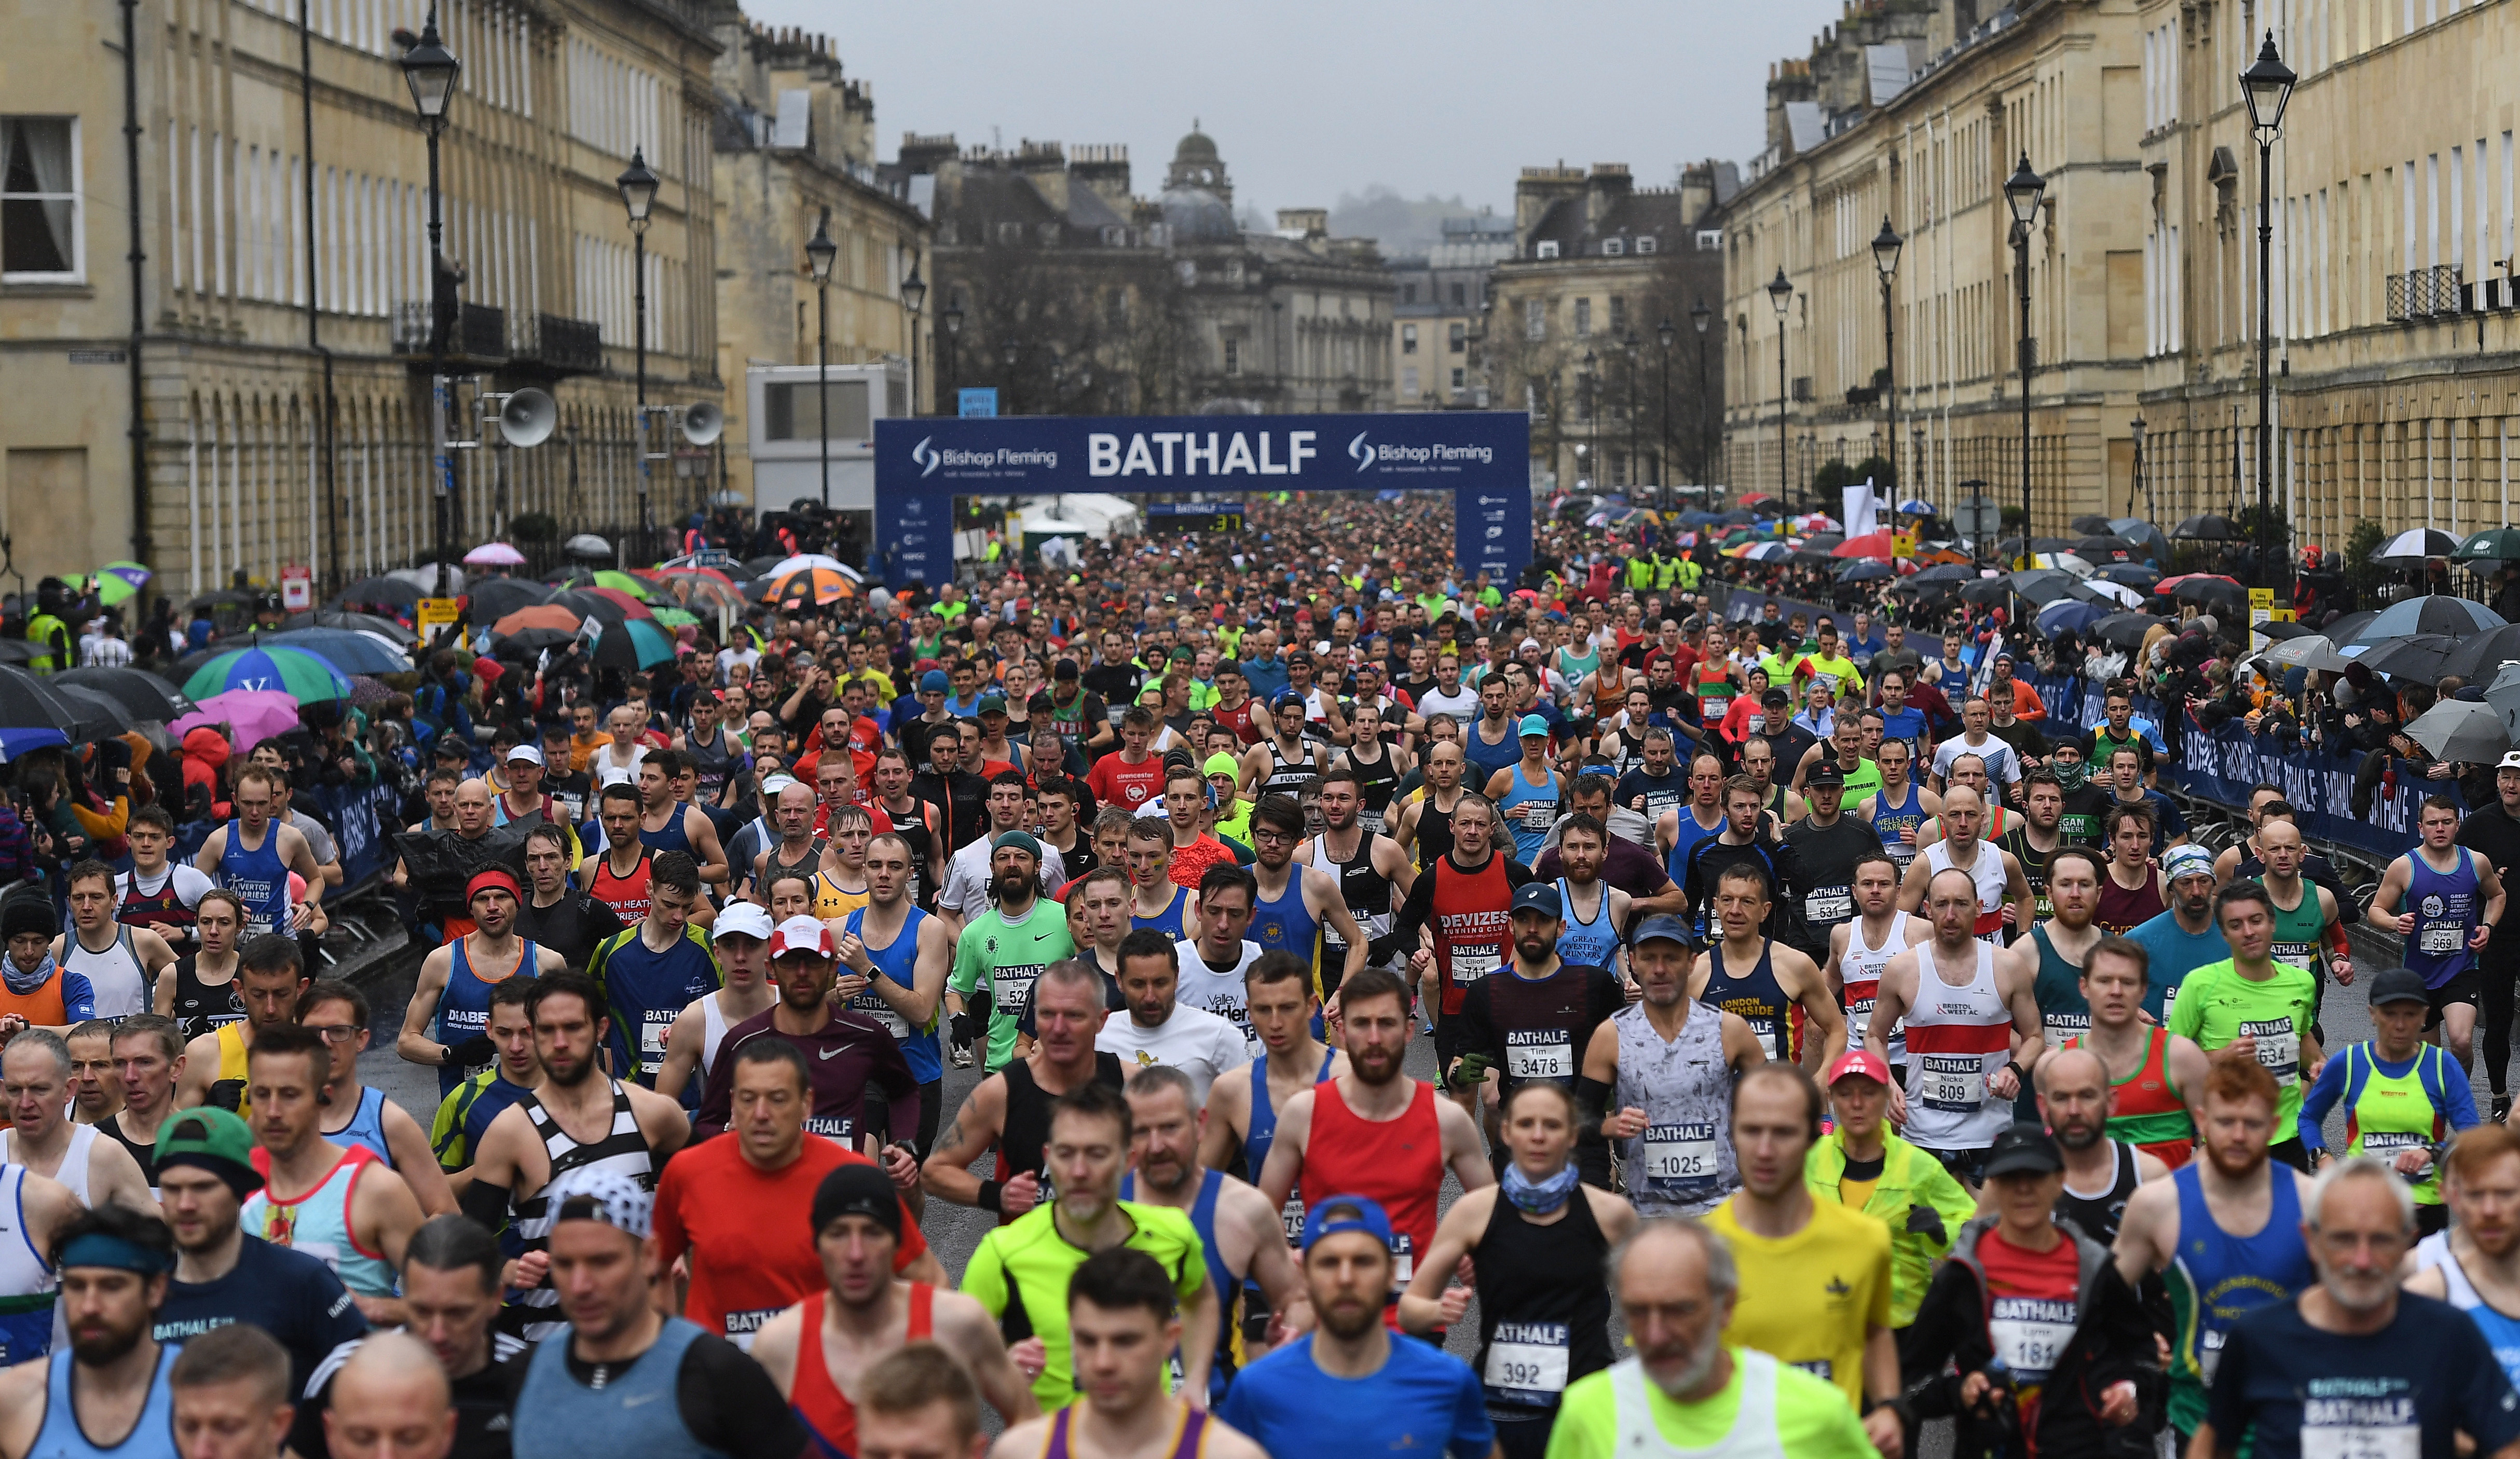  The Bath half marathon went ahead over the weekend despite the ever surging virus numbers